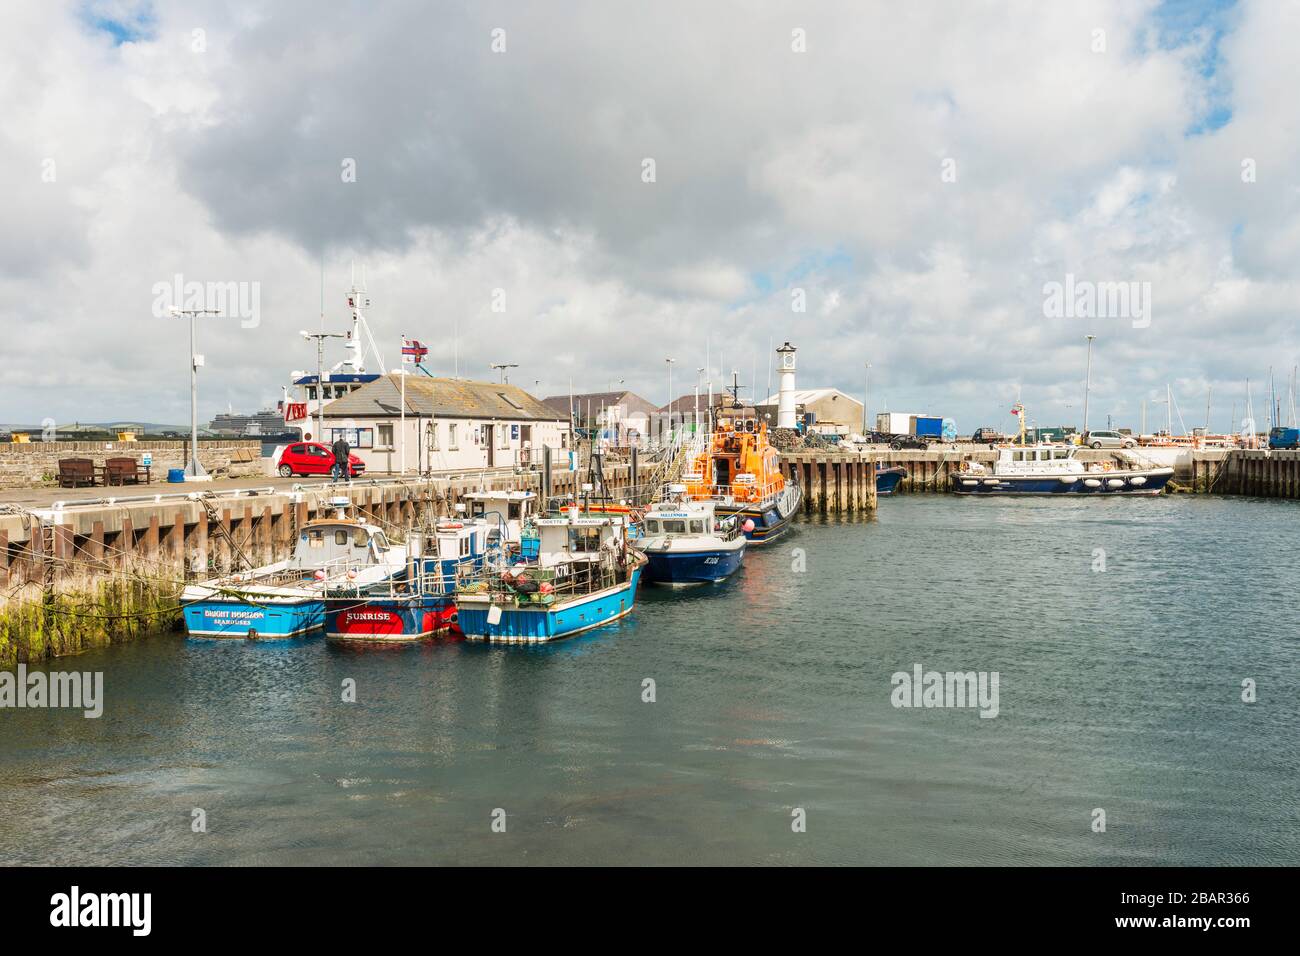 View of West Pier, Kirkwall, Orkney, Scotland, UK.  The RNLI lifeboat Margaret Foster can be seen. Stock Photo